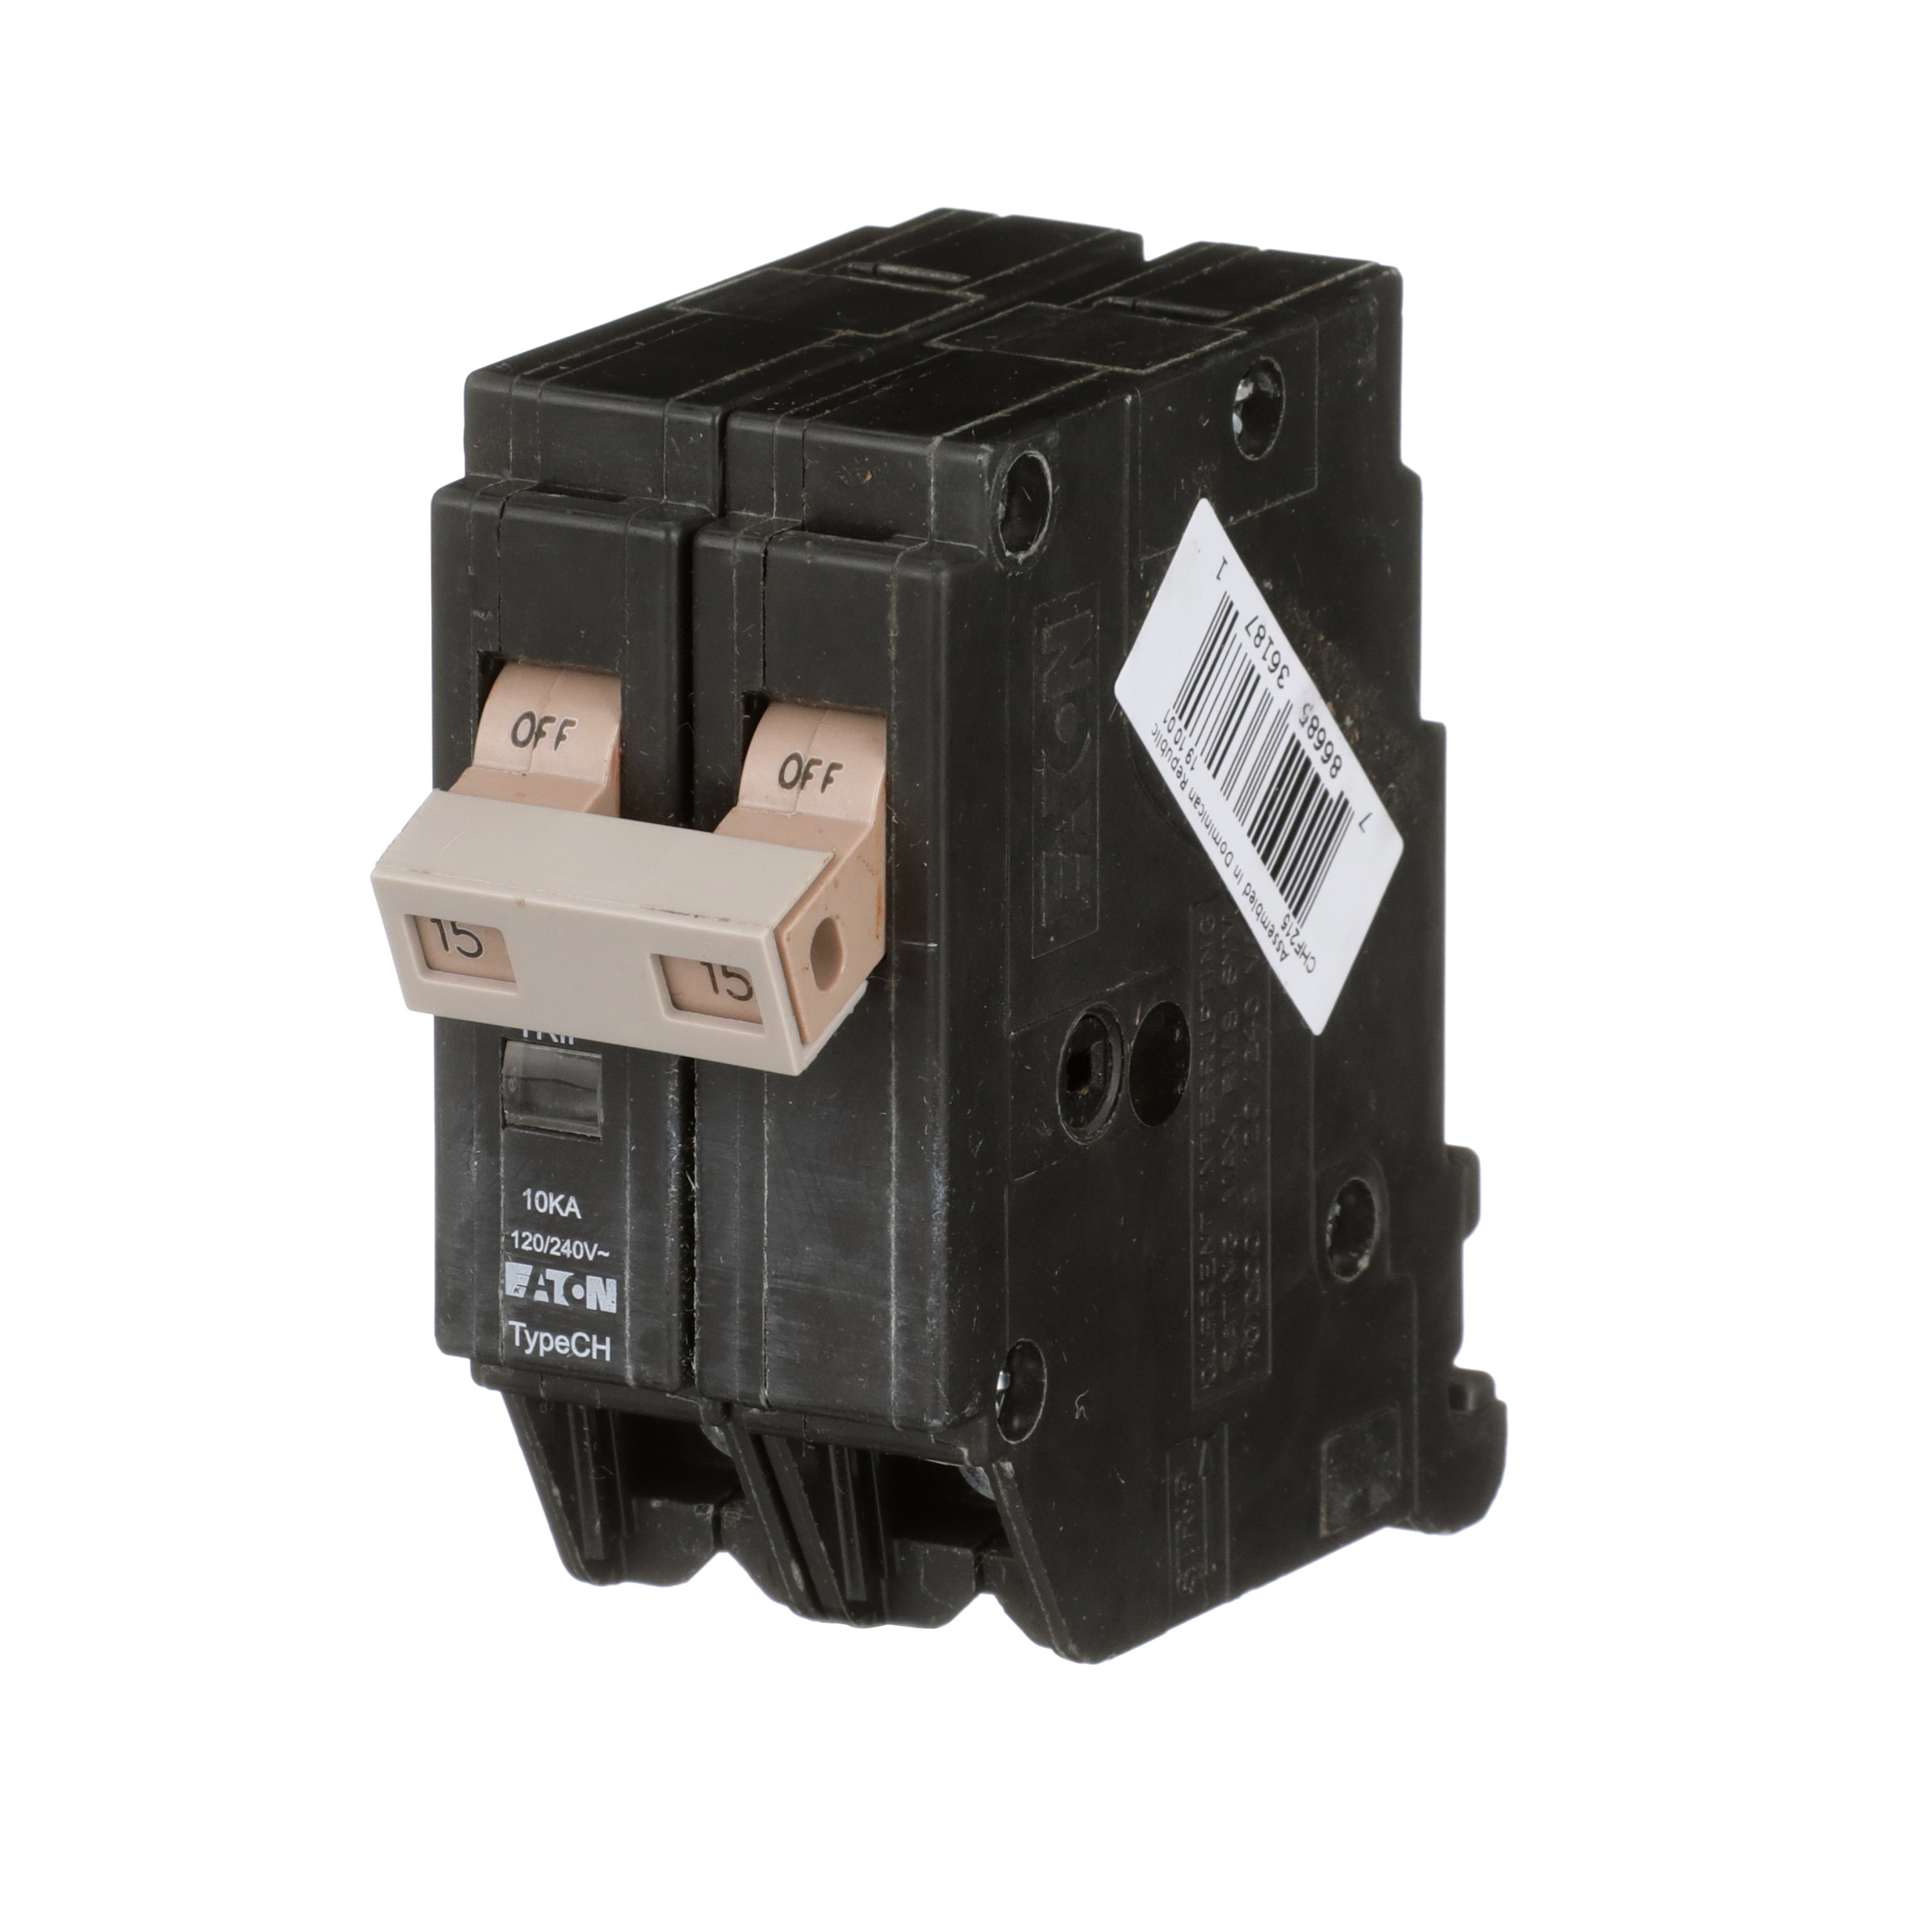 15 AMP 2 POLE CARLINGSWITCH A-Series cIRCUIT Breaker AF2-X0-02-314-1H1-D 15-amp 